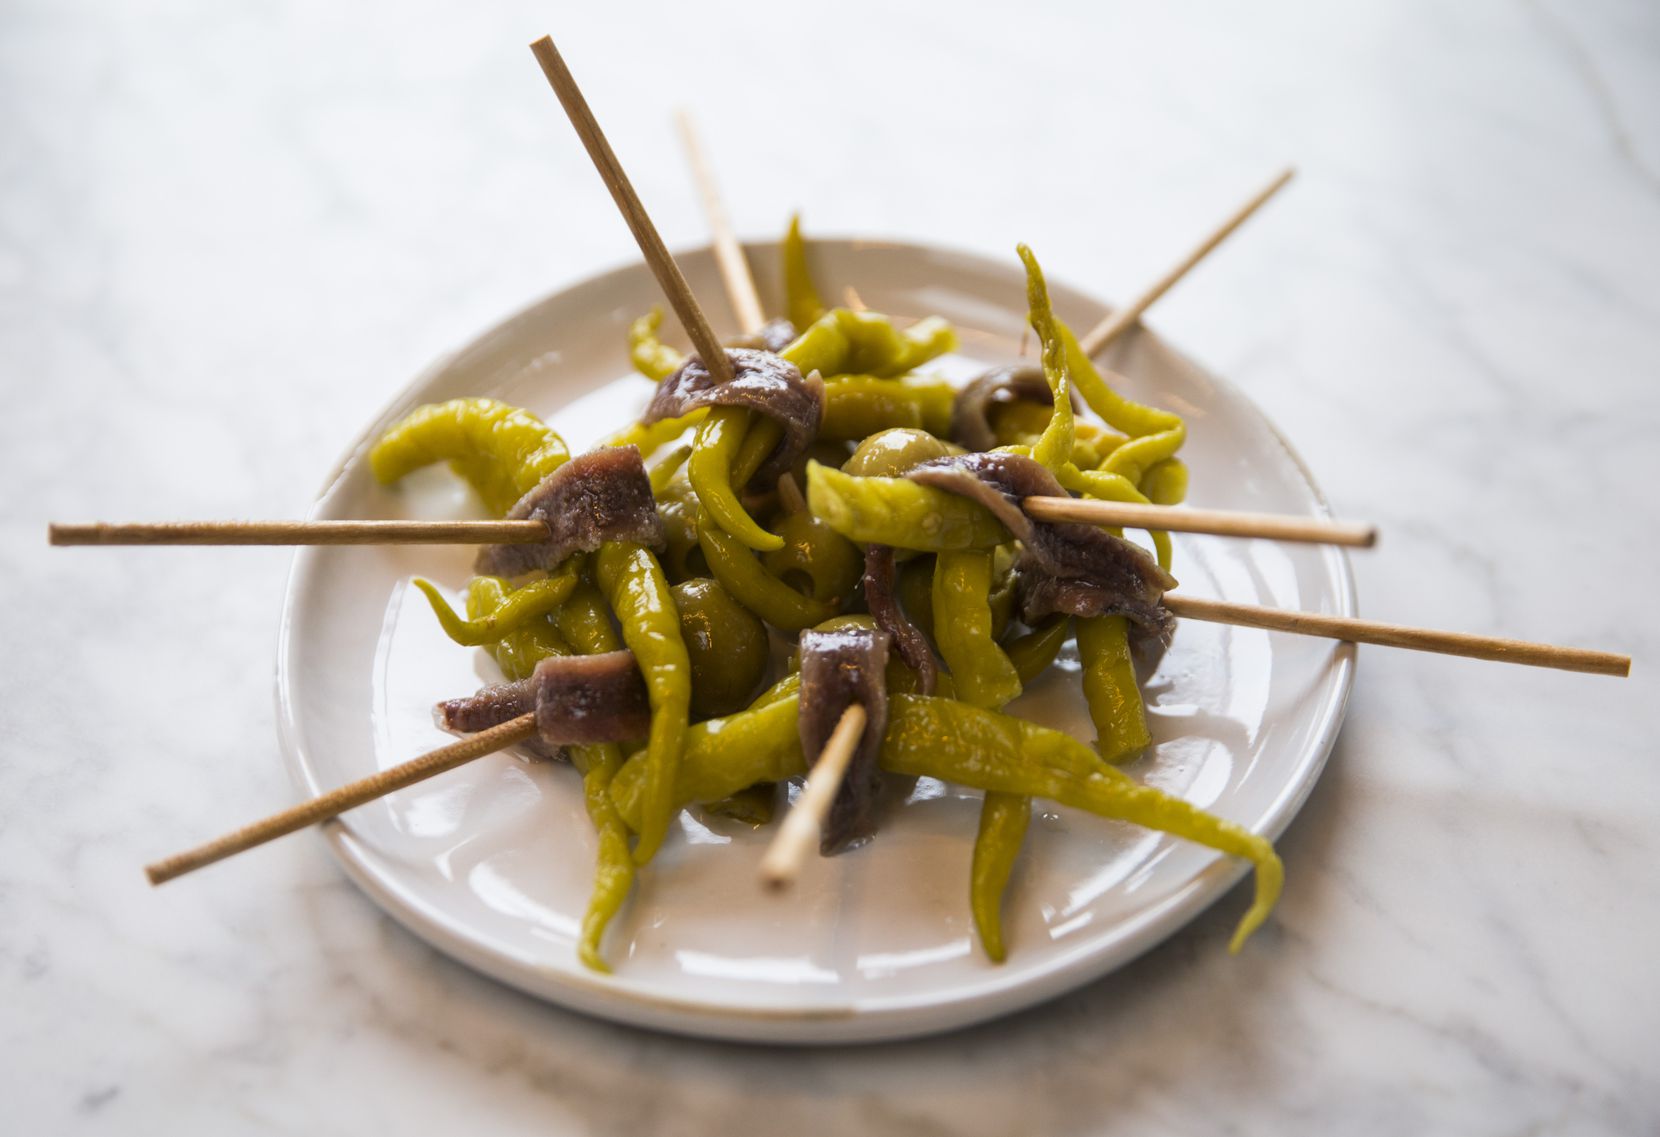 "Gilda," skewers of anchovy, olive, and Basque peppers